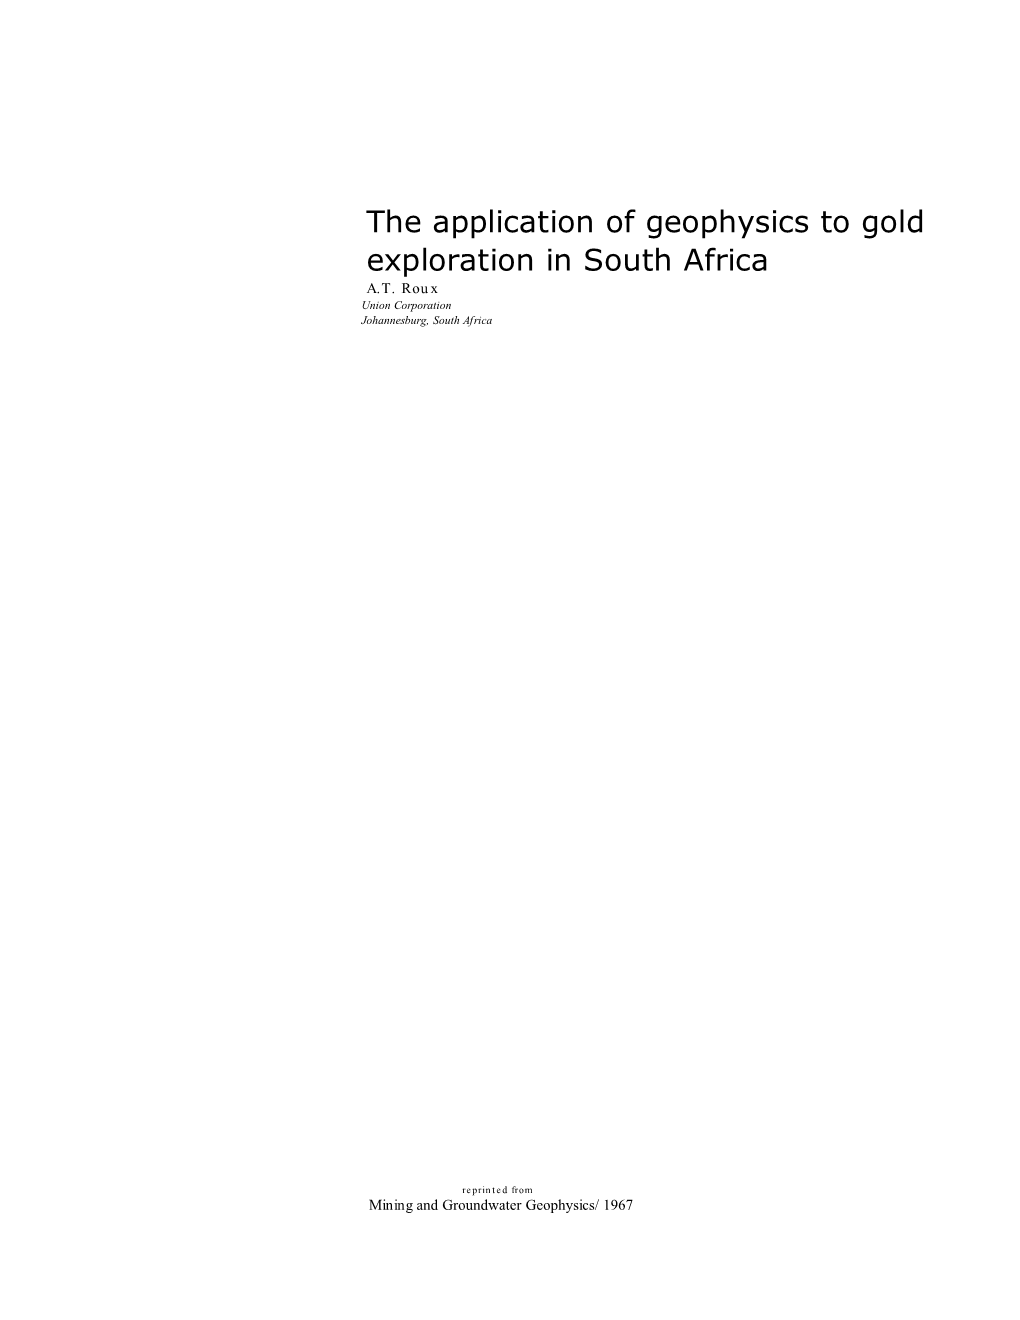 The Application of Geophysics to Gold Exploration in South Africa A.T